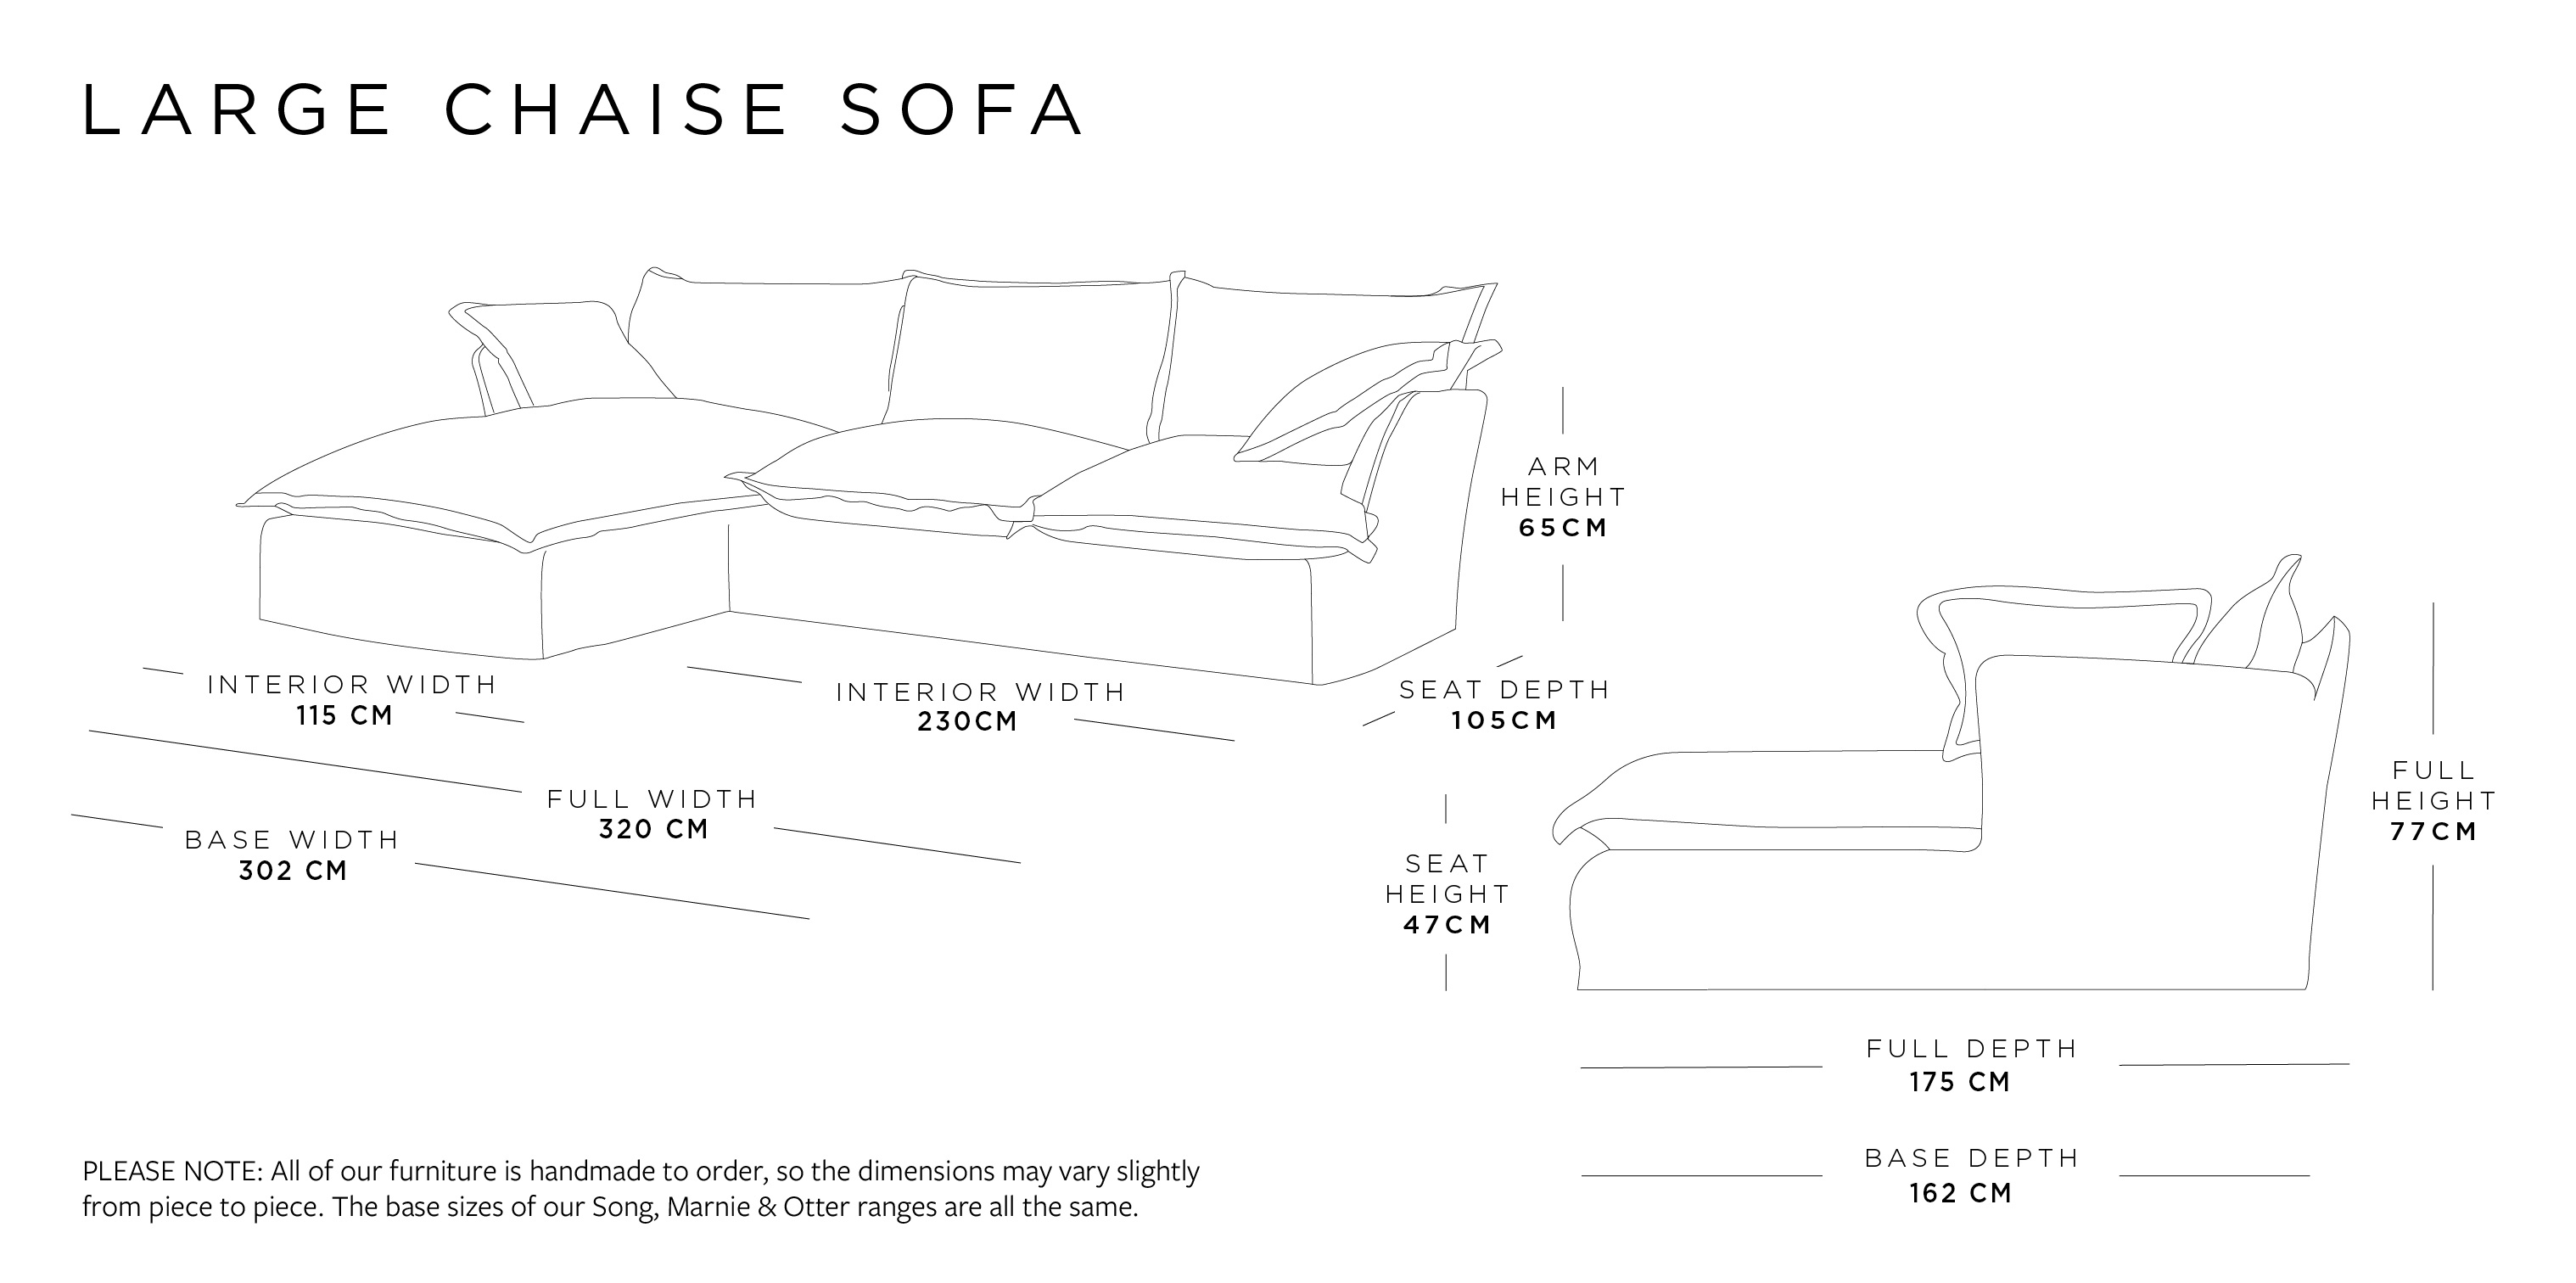 Large Chaise Sofa | Otter Range Size Guide